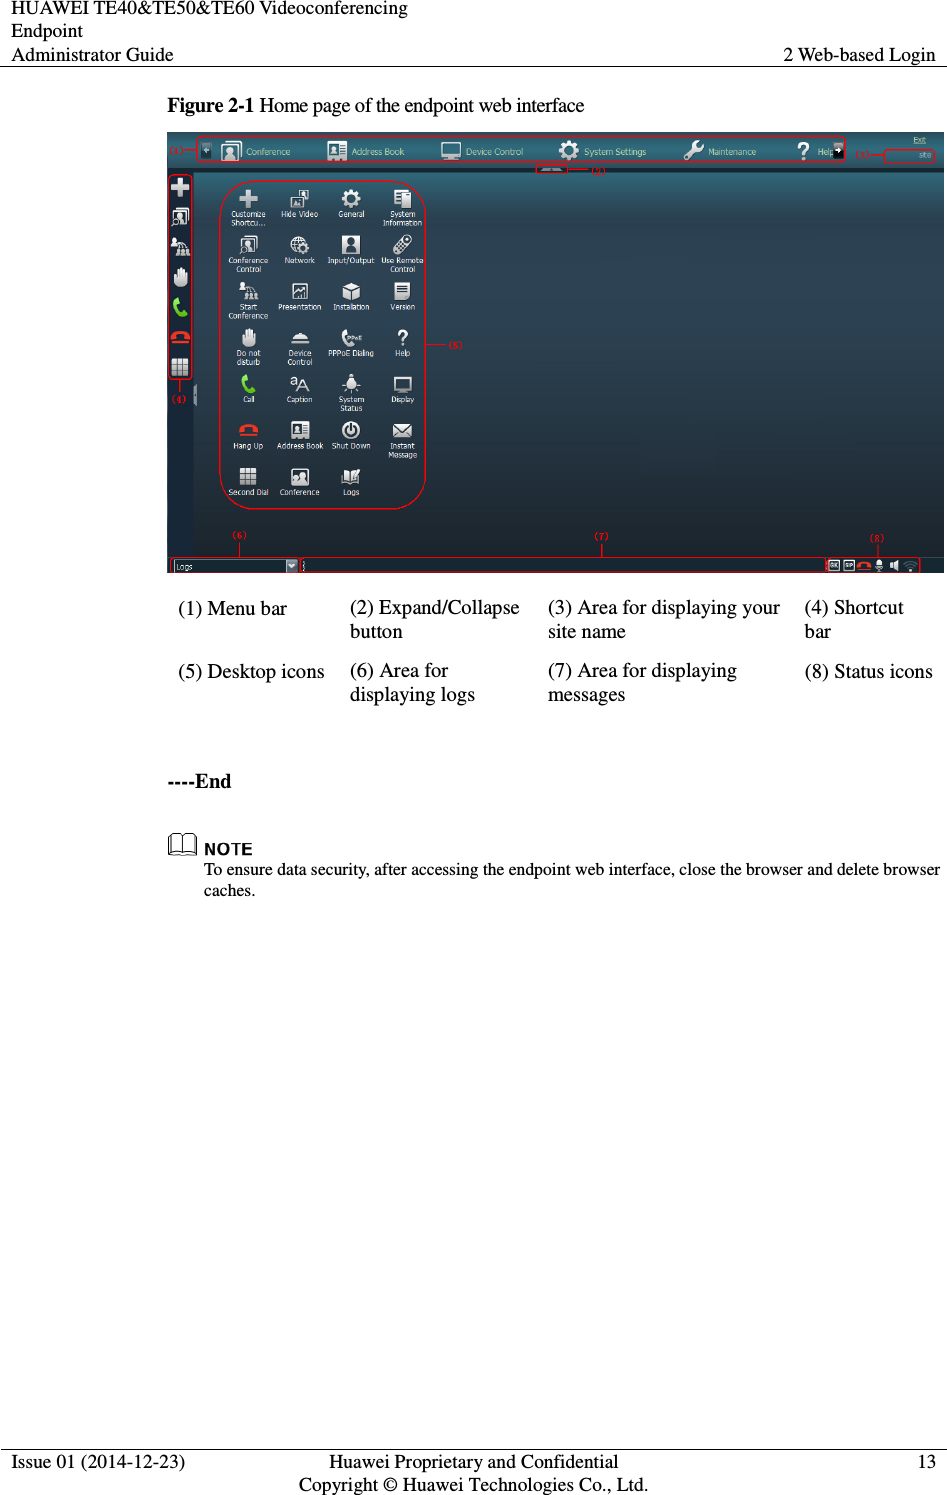 HUAWEI TE40&amp;TE50&amp;TE60 Videoconferencing Endpoint Administrator Guide  2 Web-based Login  Issue 01 (2014-12-23)  Huawei Proprietary and Confidential                                     Copyright © Huawei Technologies Co., Ltd. 13  Figure 2-1 Home page of the endpoint web interface  (1) Menu bar  (2) Expand/Collapse button (3) Area for displaying your site name (4) Shortcut bar (5) Desktop icons  (6) Area for displaying logs (7) Area for displaying messages (8) Status icons  ----End  To ensure data security, after accessing the endpoint web interface, close the browser and delete browser caches. 